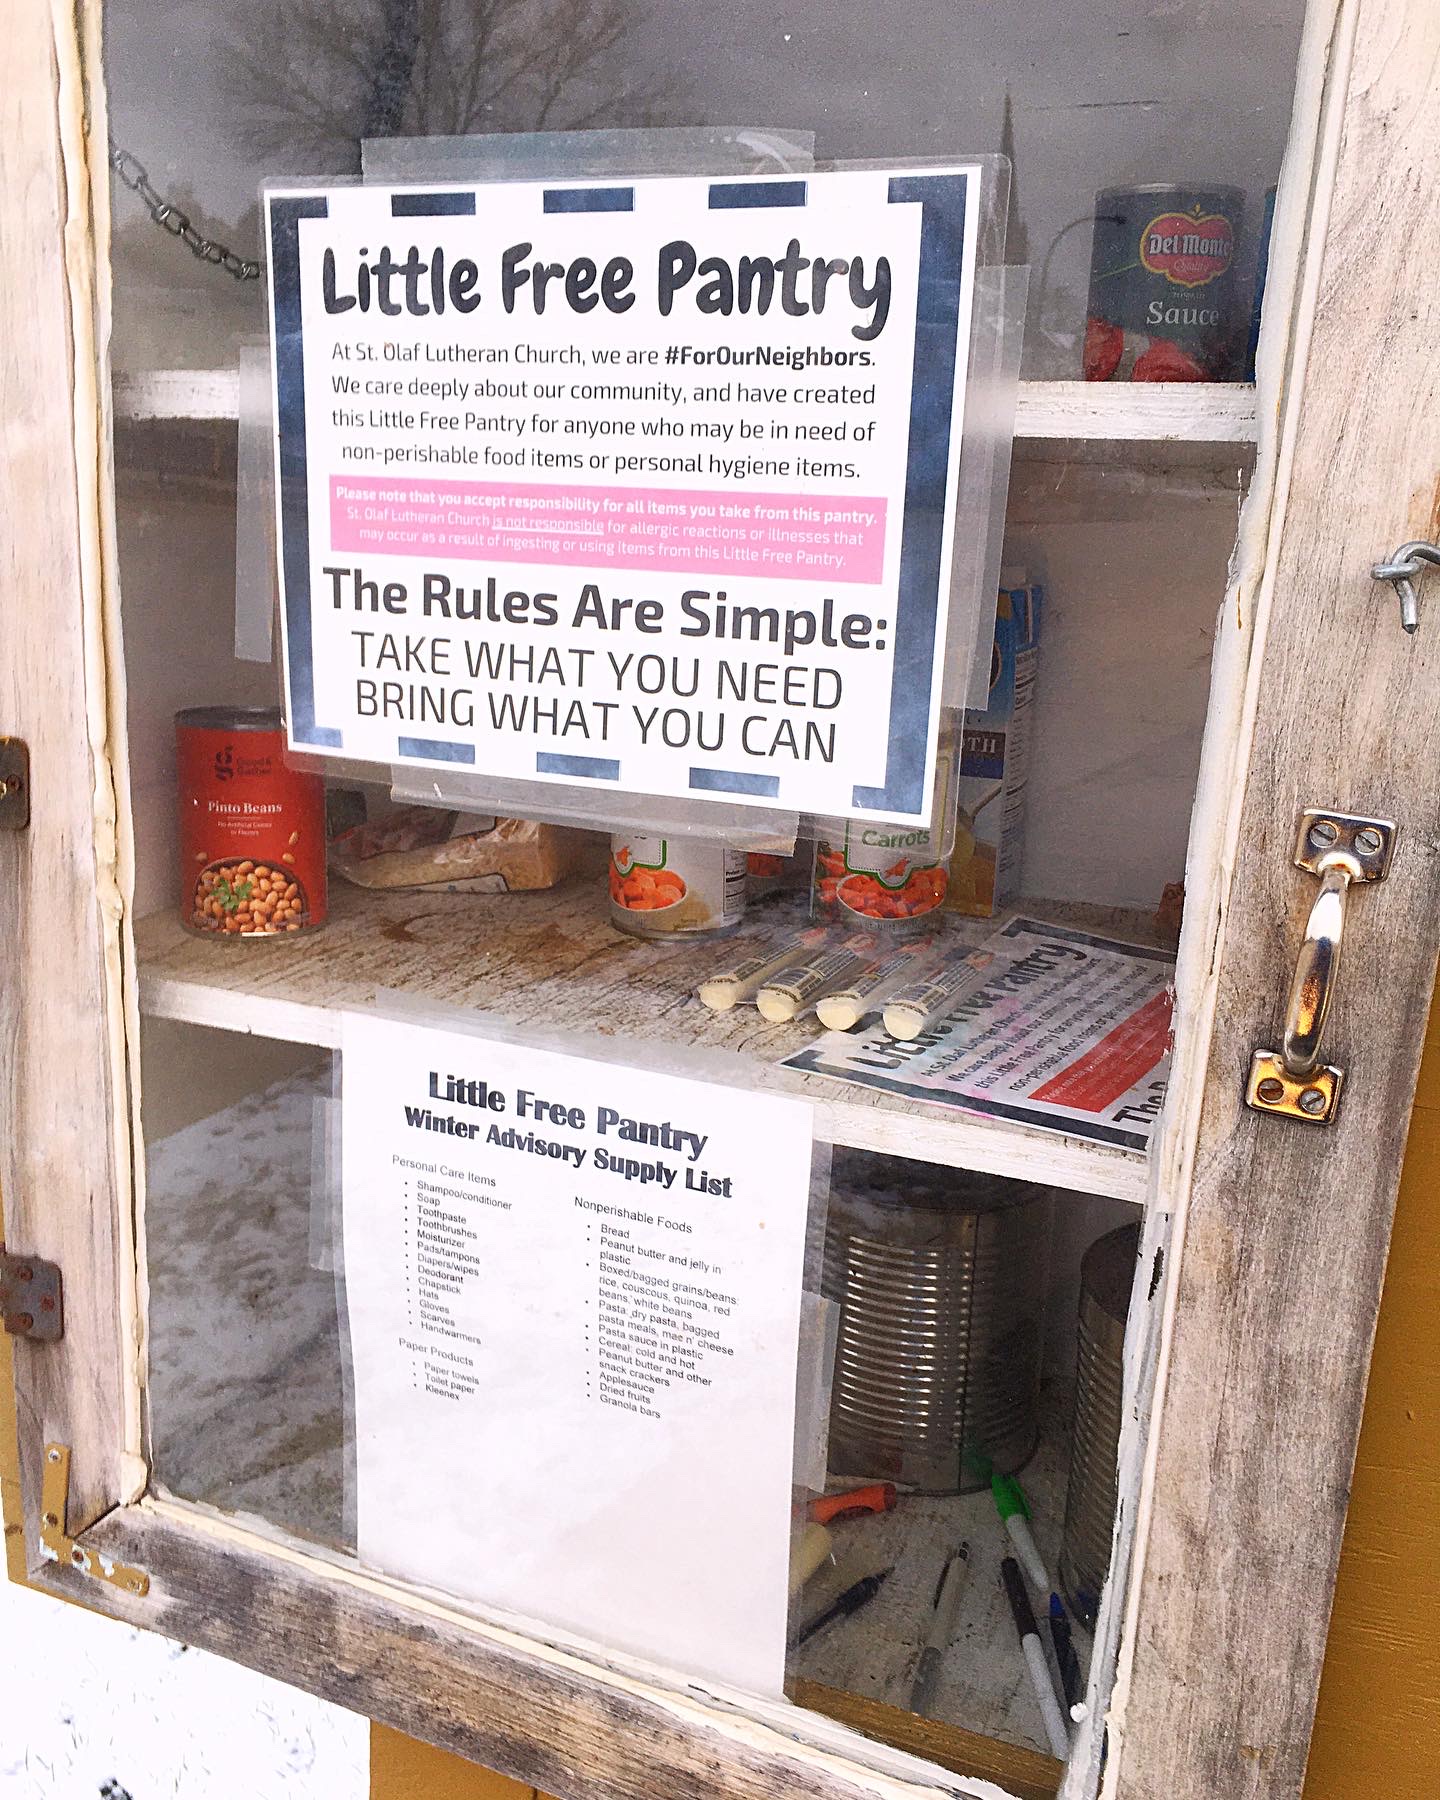 St Olaf Lutheran Church Little Free Pantry Photo 1